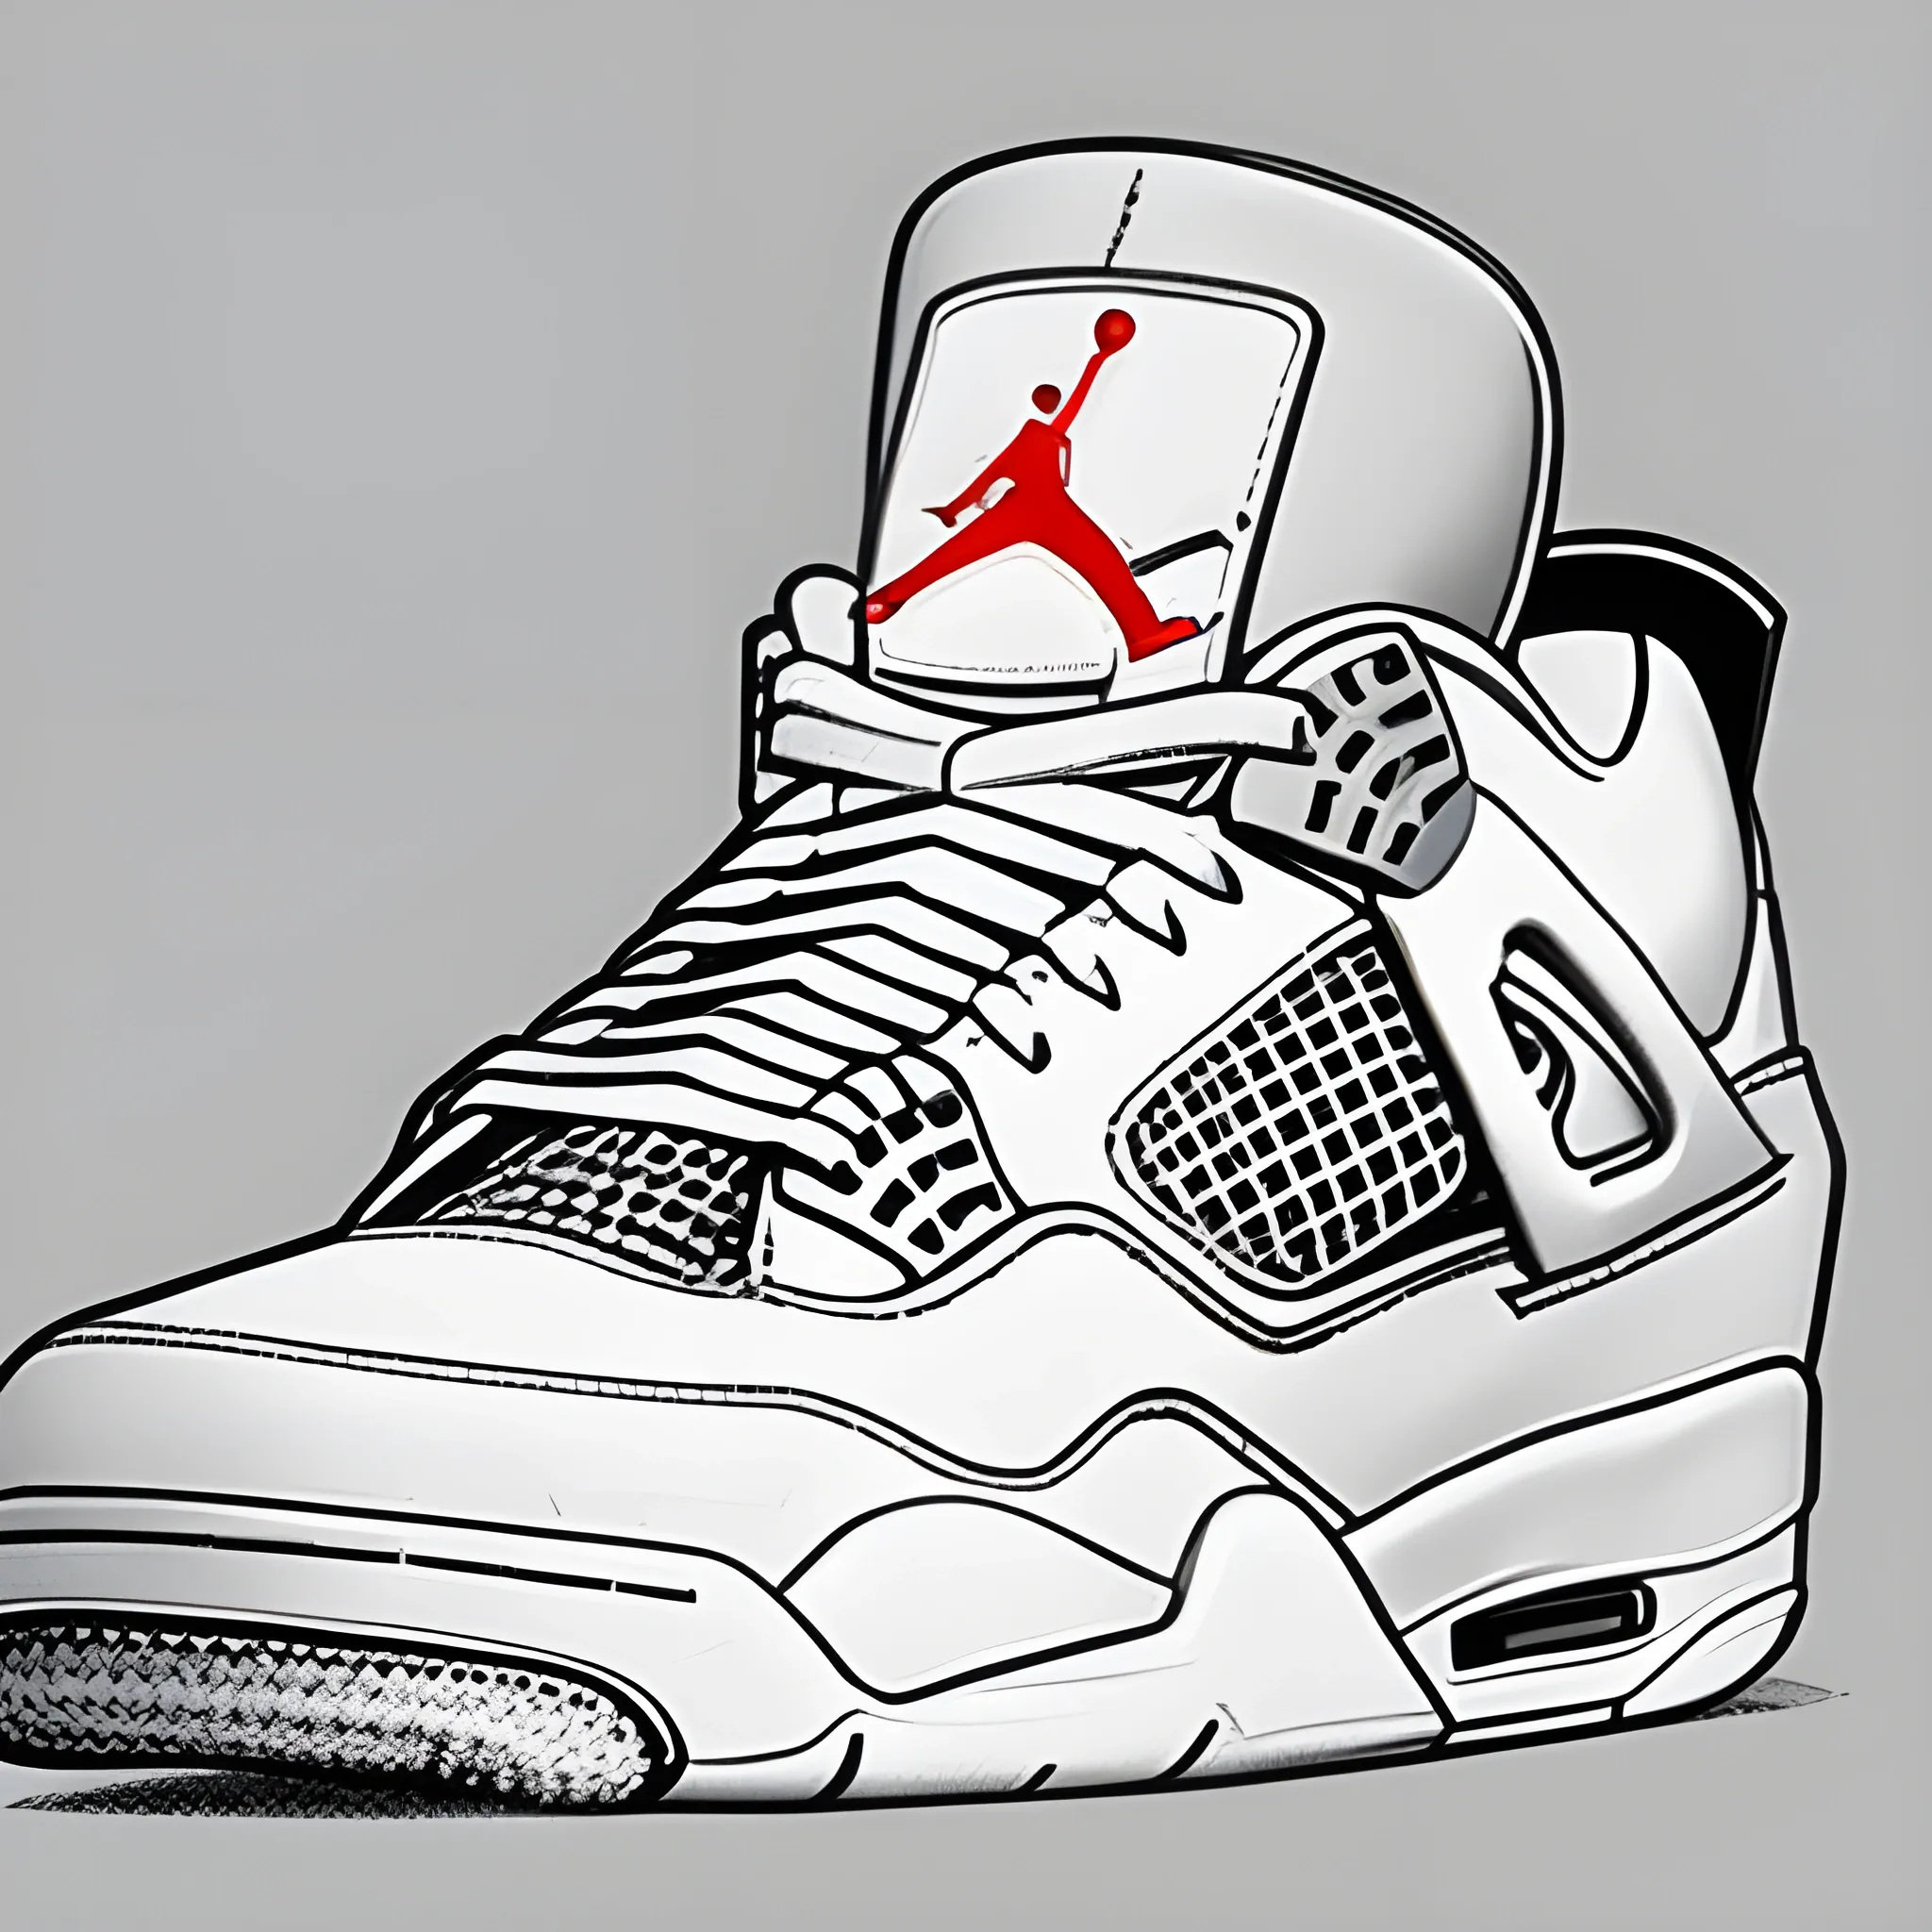 Jordan shoes retro 4 palomino in the style of a 80s, 1980s Penci ...